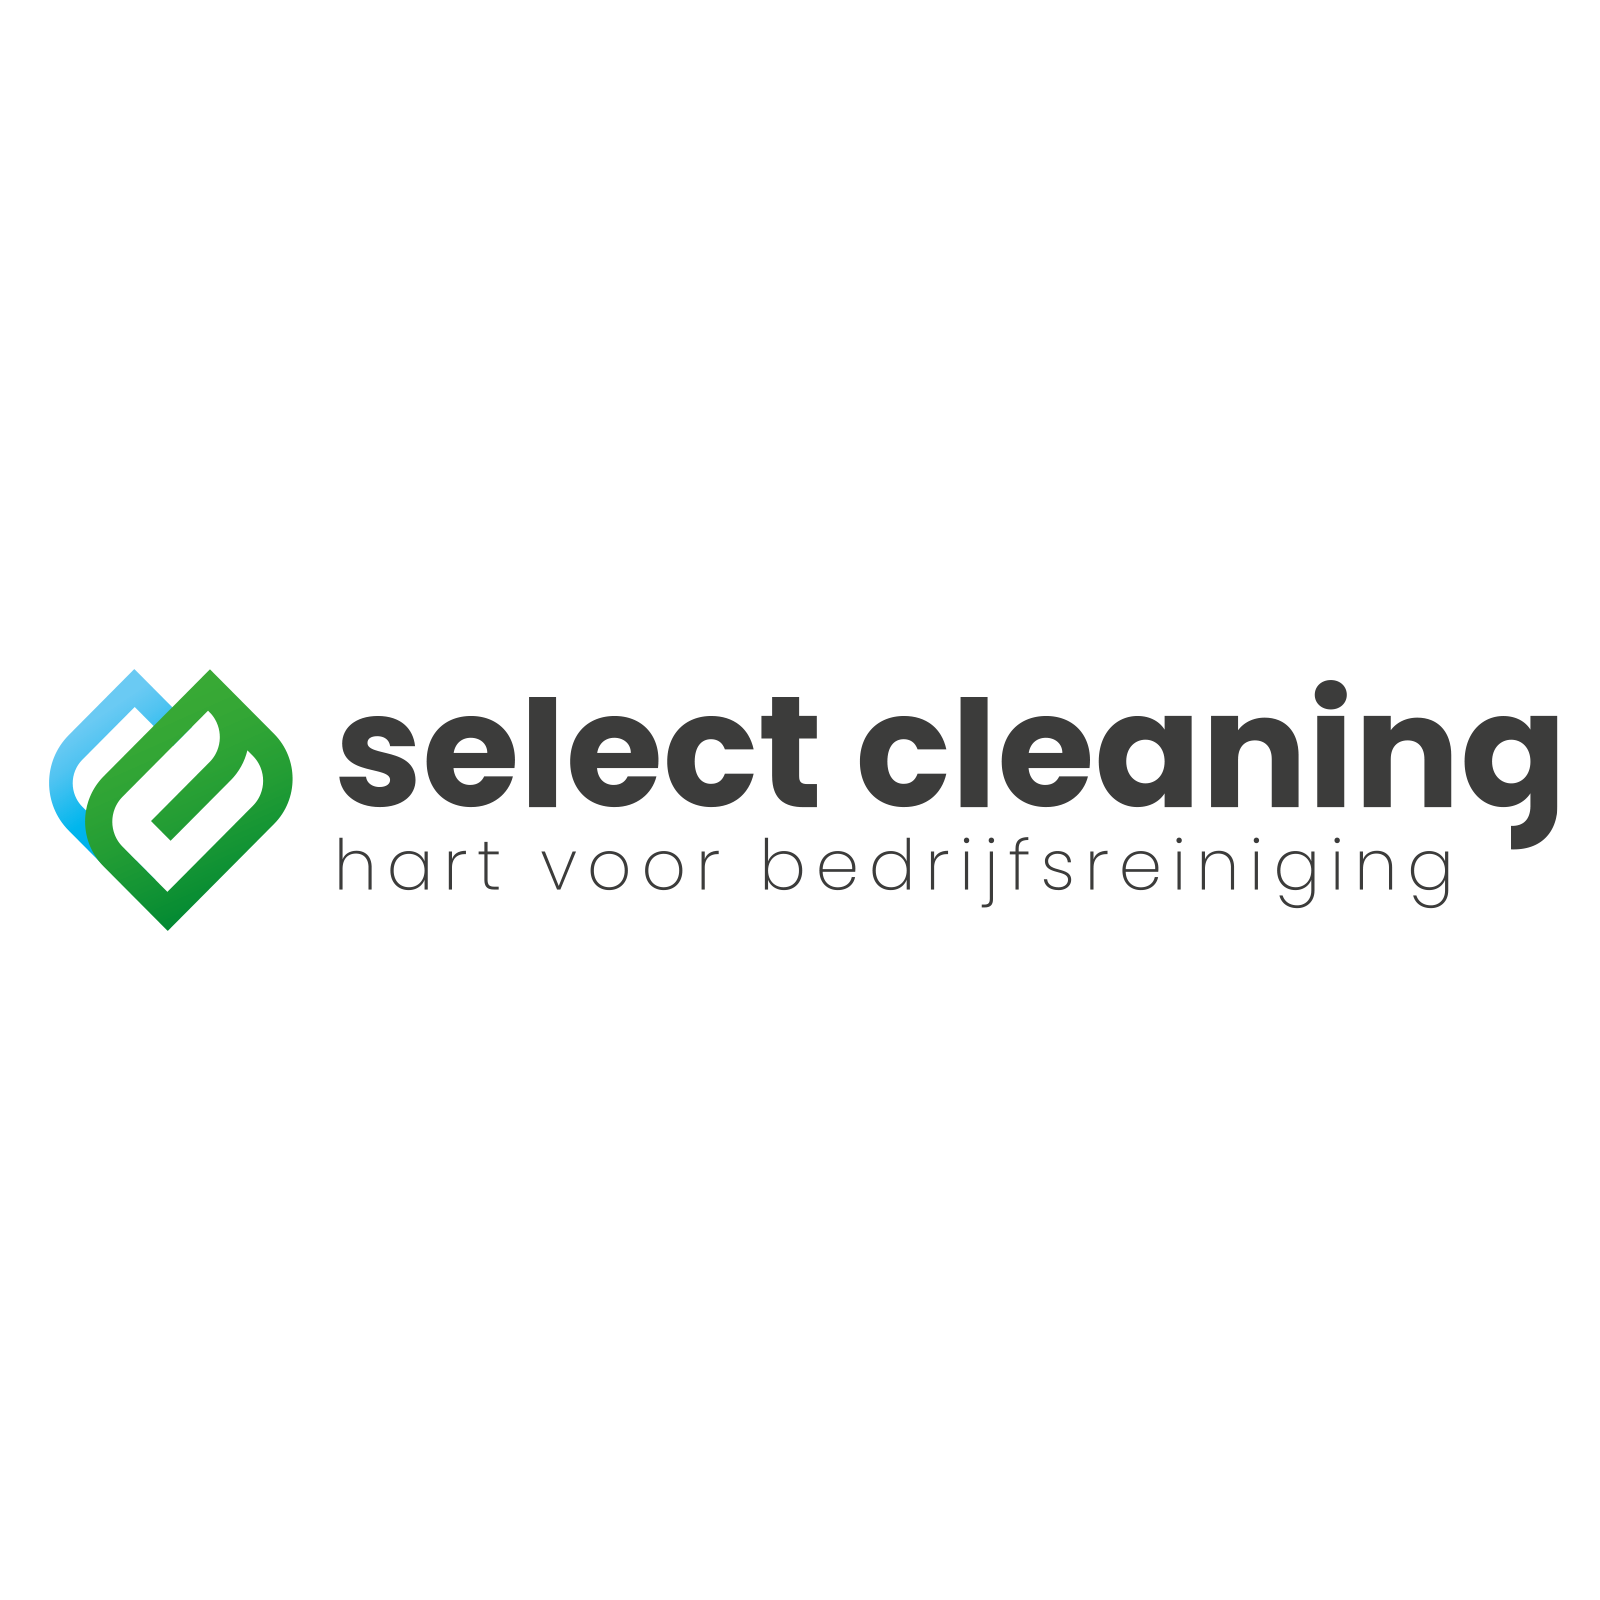 Select Cleaning